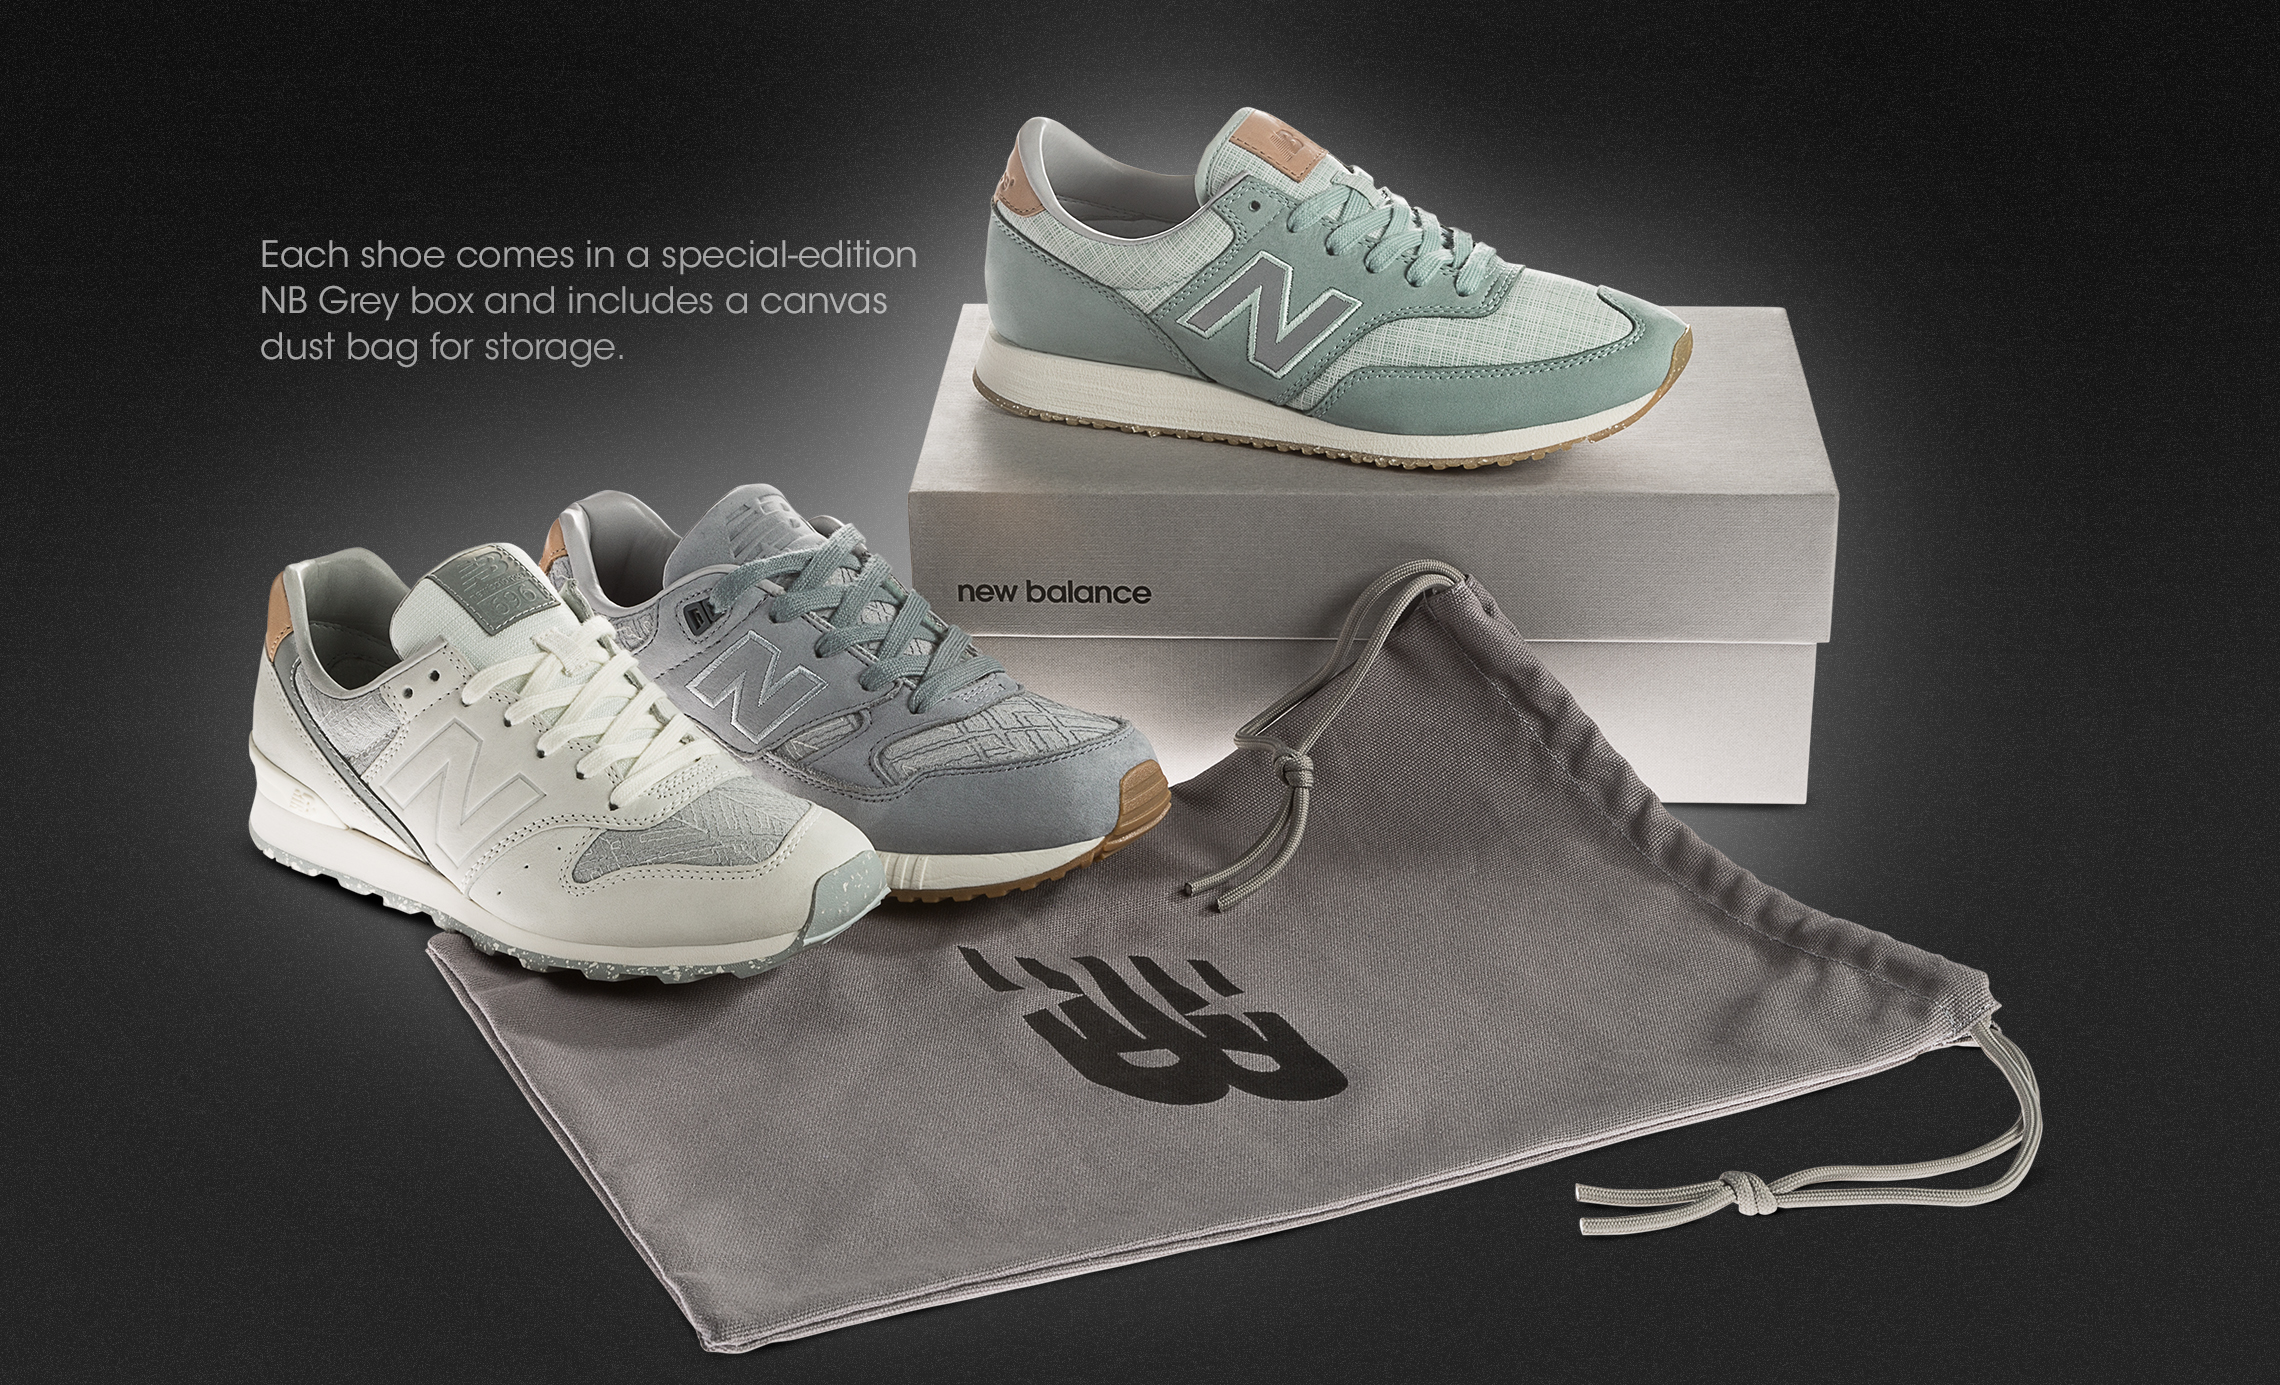 NB Grey new balance capsule collection